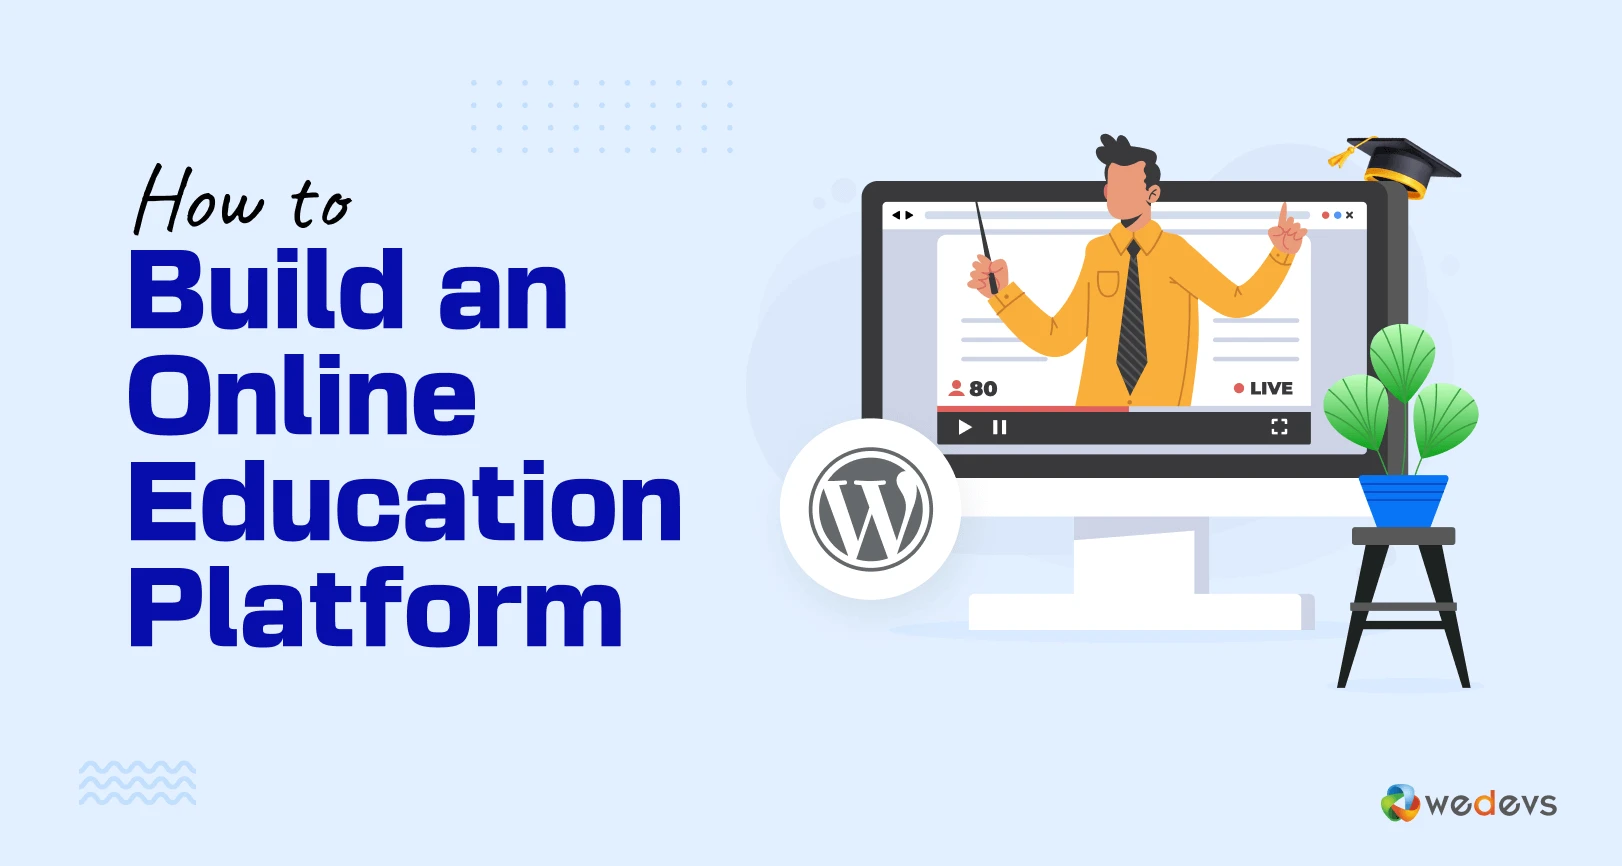 How to Build an Online Education Platform Using WordPress